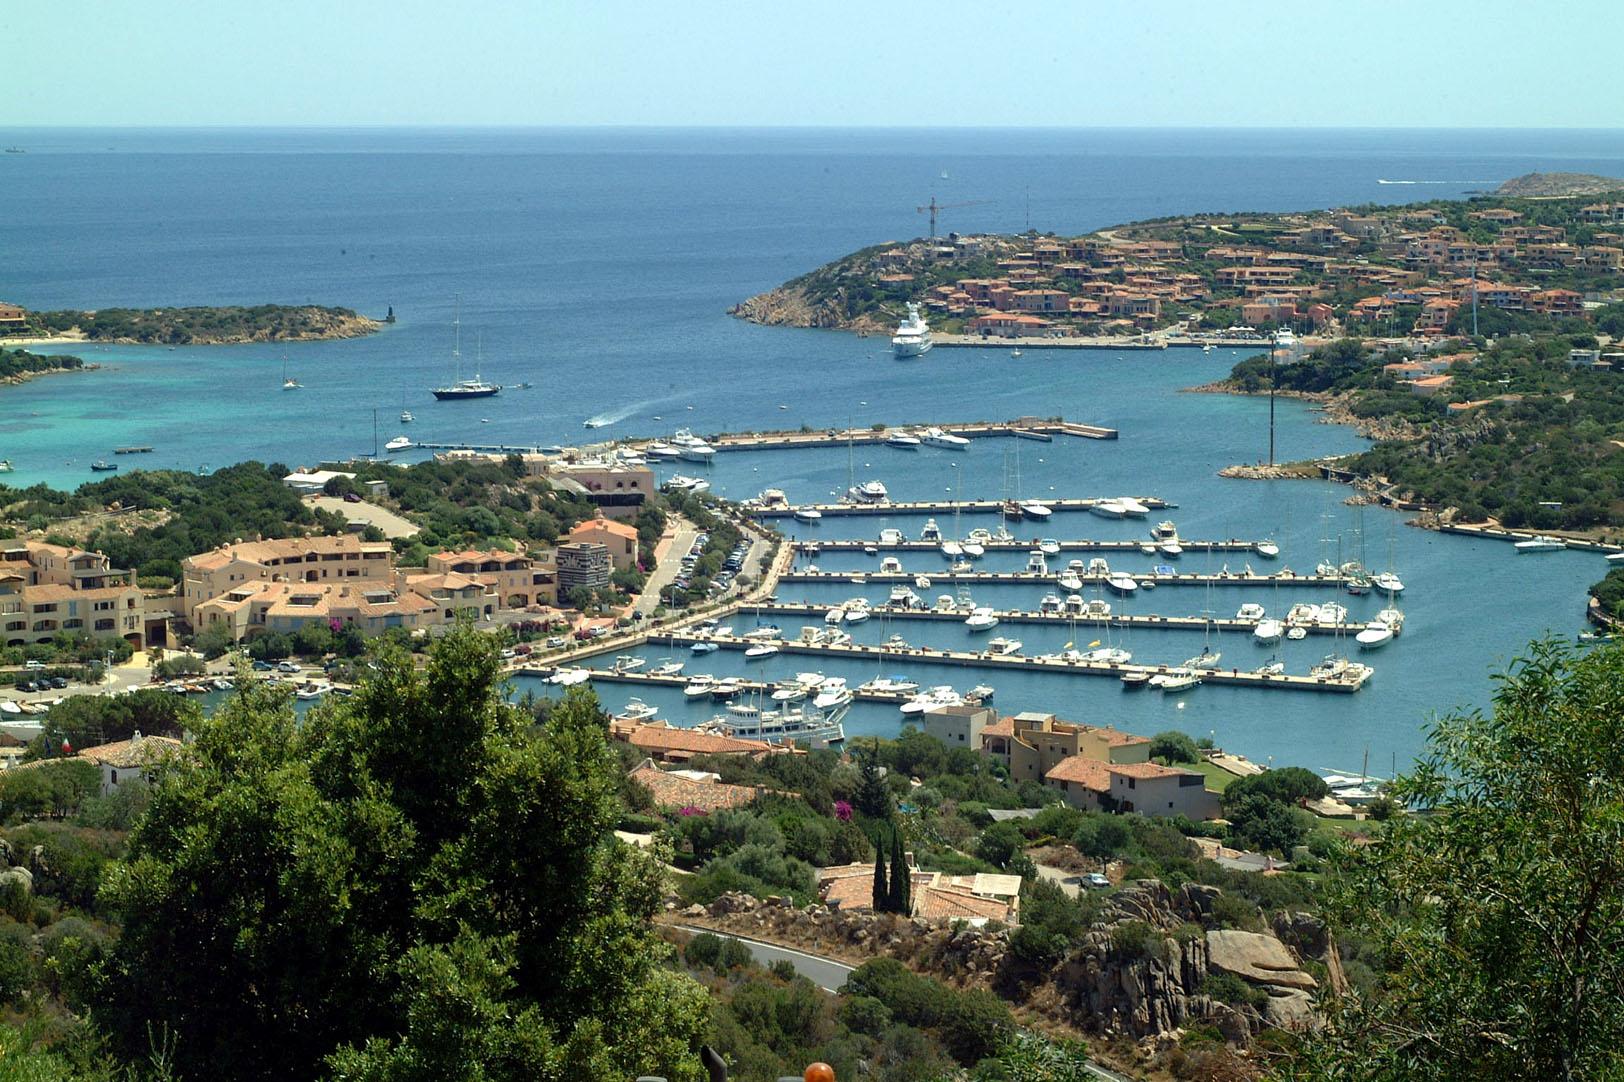 &quot;We repair gas cookers&quot;, but it was an excuse to break into apartments. The discovery in Porto Cervo